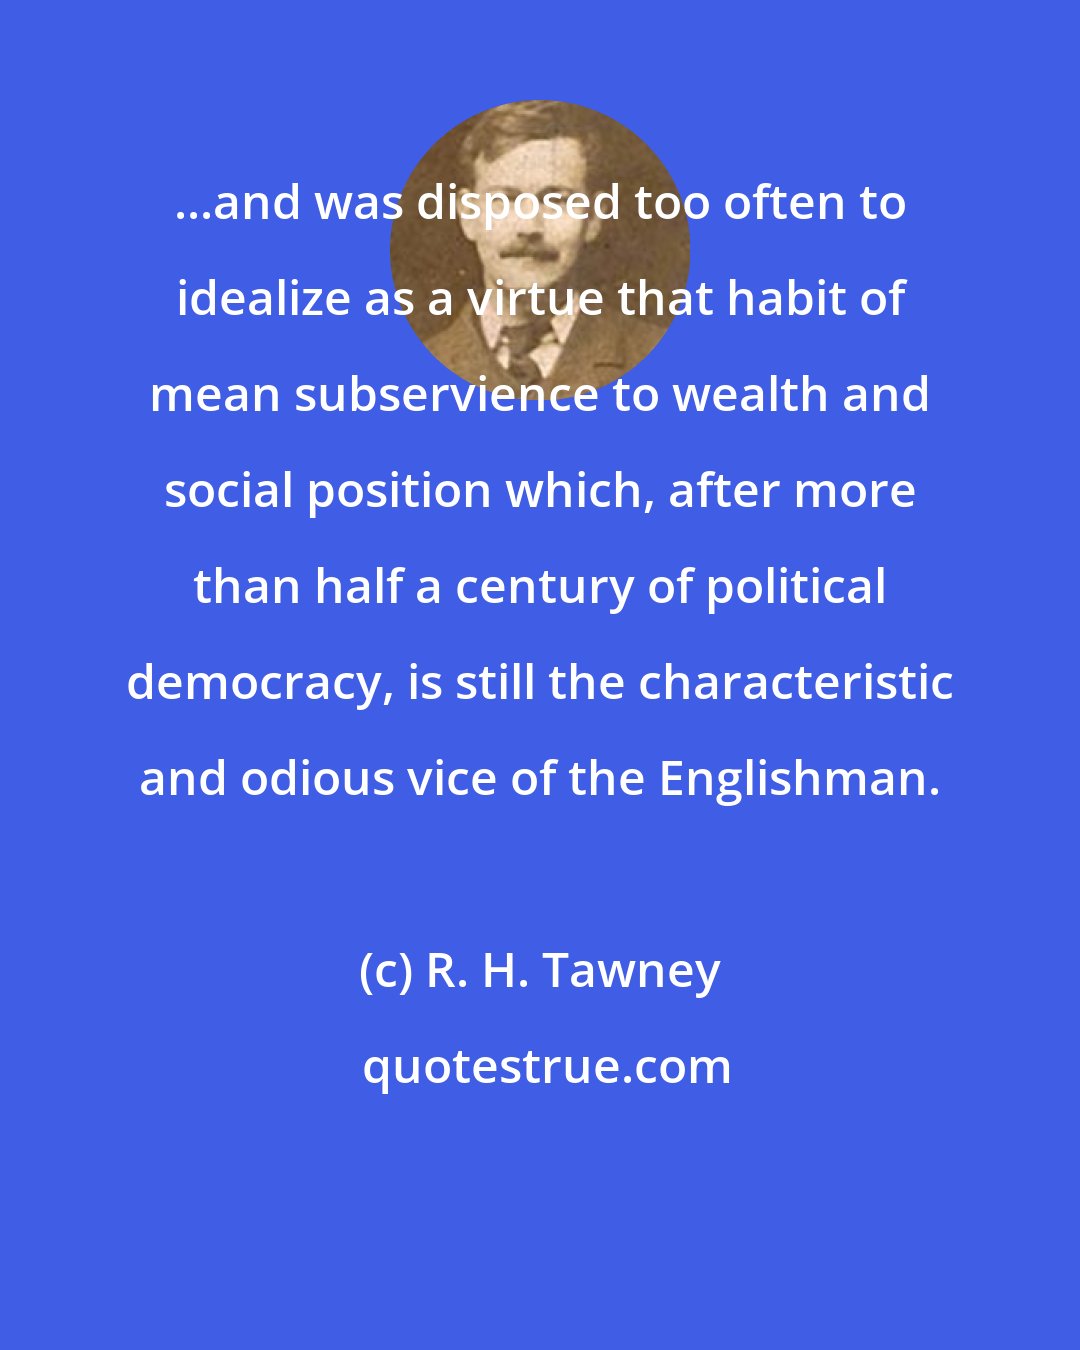 R. H. Tawney: ...and was disposed too often to idealize as a virtue that habit of mean subservience to wealth and social position which, after more than half a century of political democracy, is still the characteristic and odious vice of the Englishman.